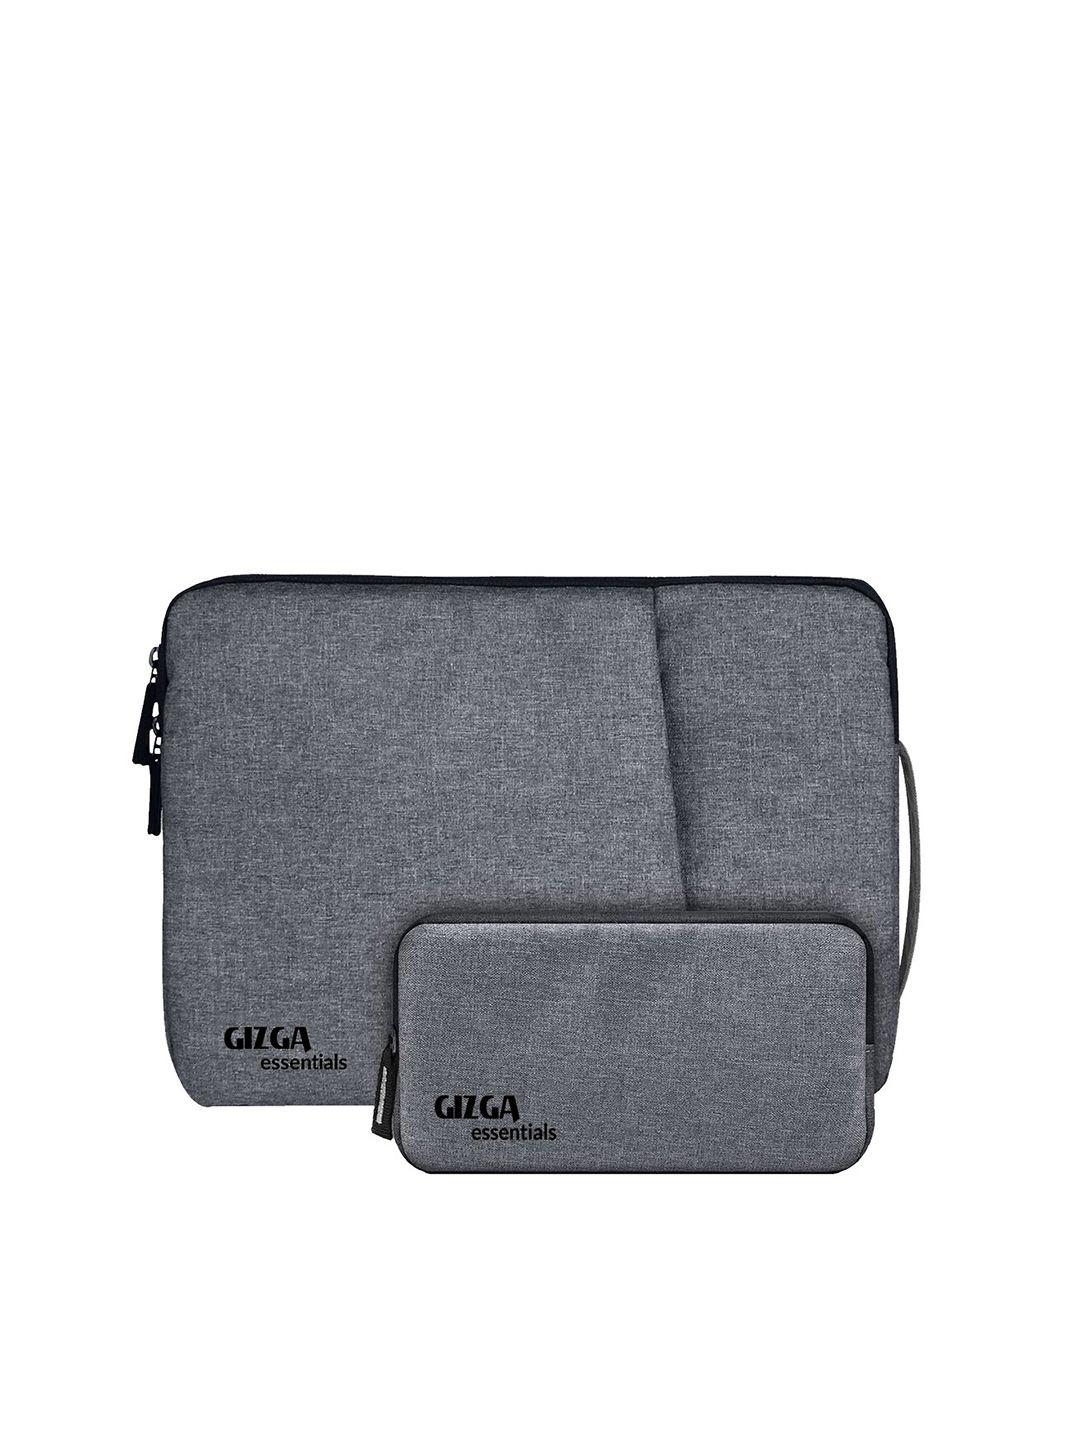 gizga essentials unisex grey 14 inch laptop sleeve with standalone case